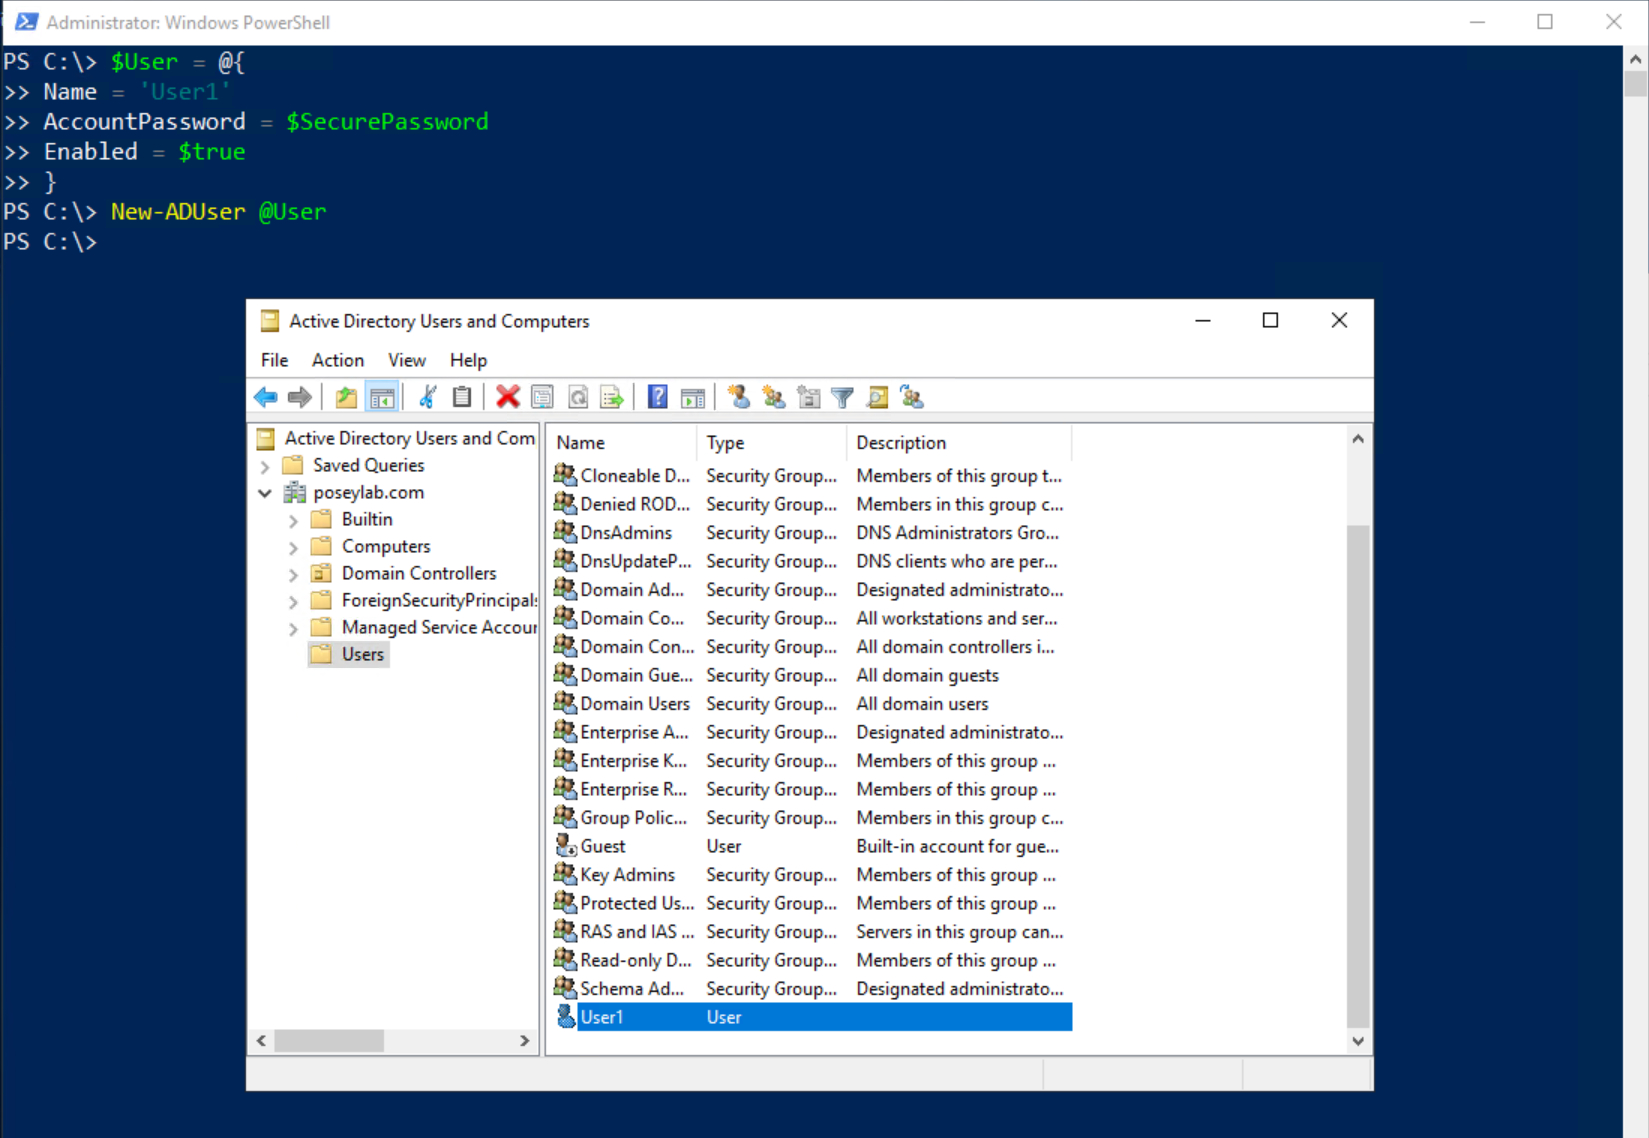 PowerShell showing the creation of an Active Directory user account